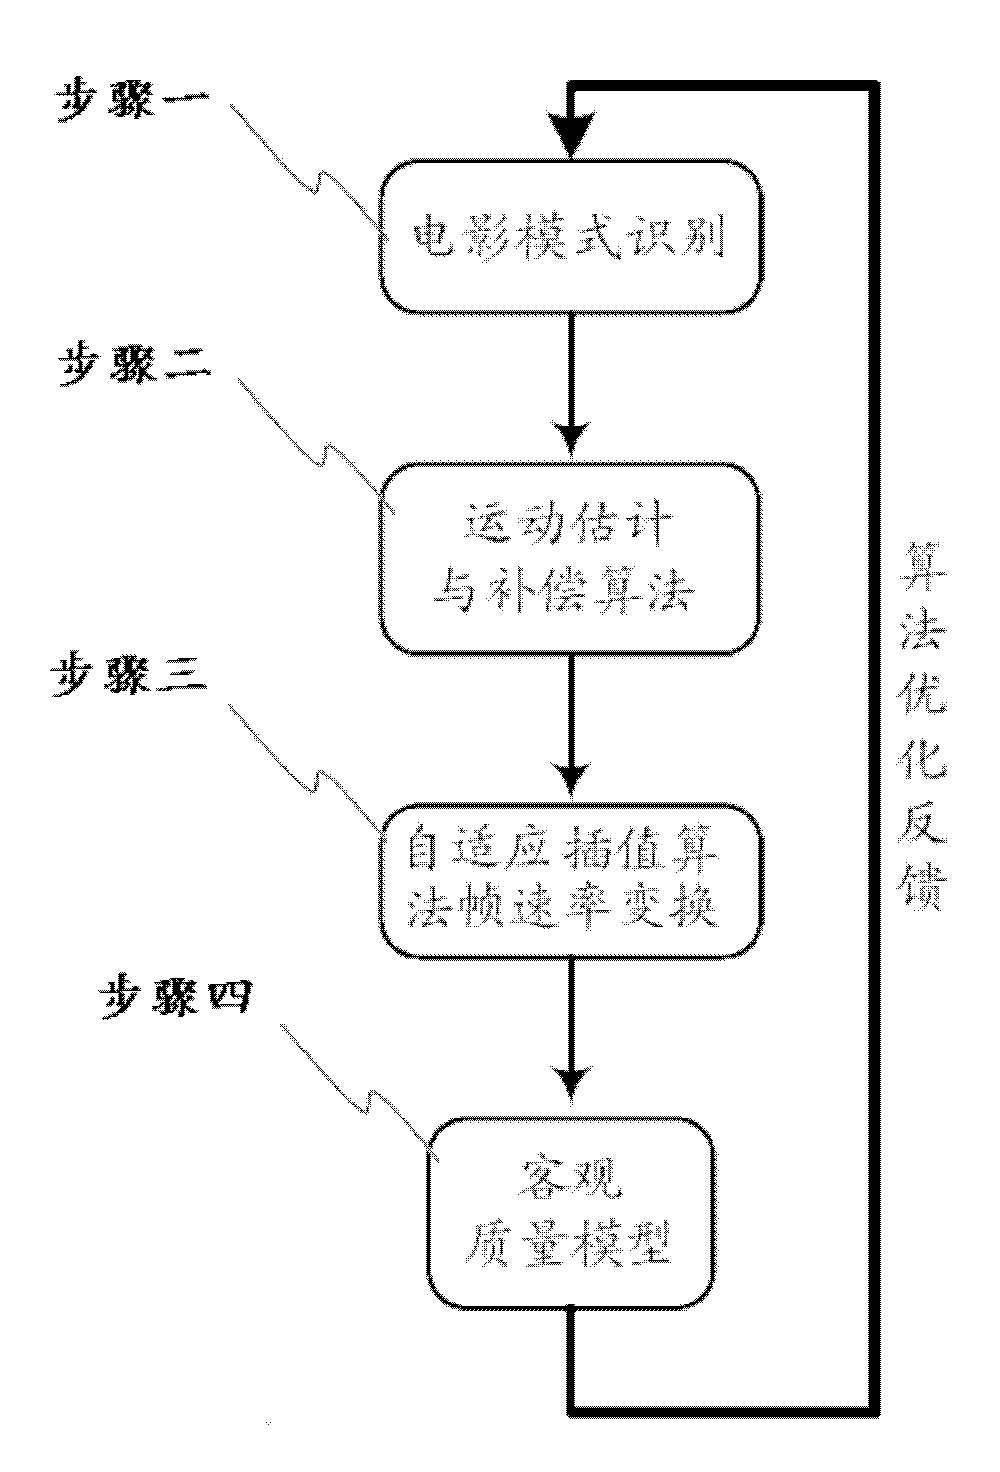 Speed conversion processing module and method of high definition digital video frame